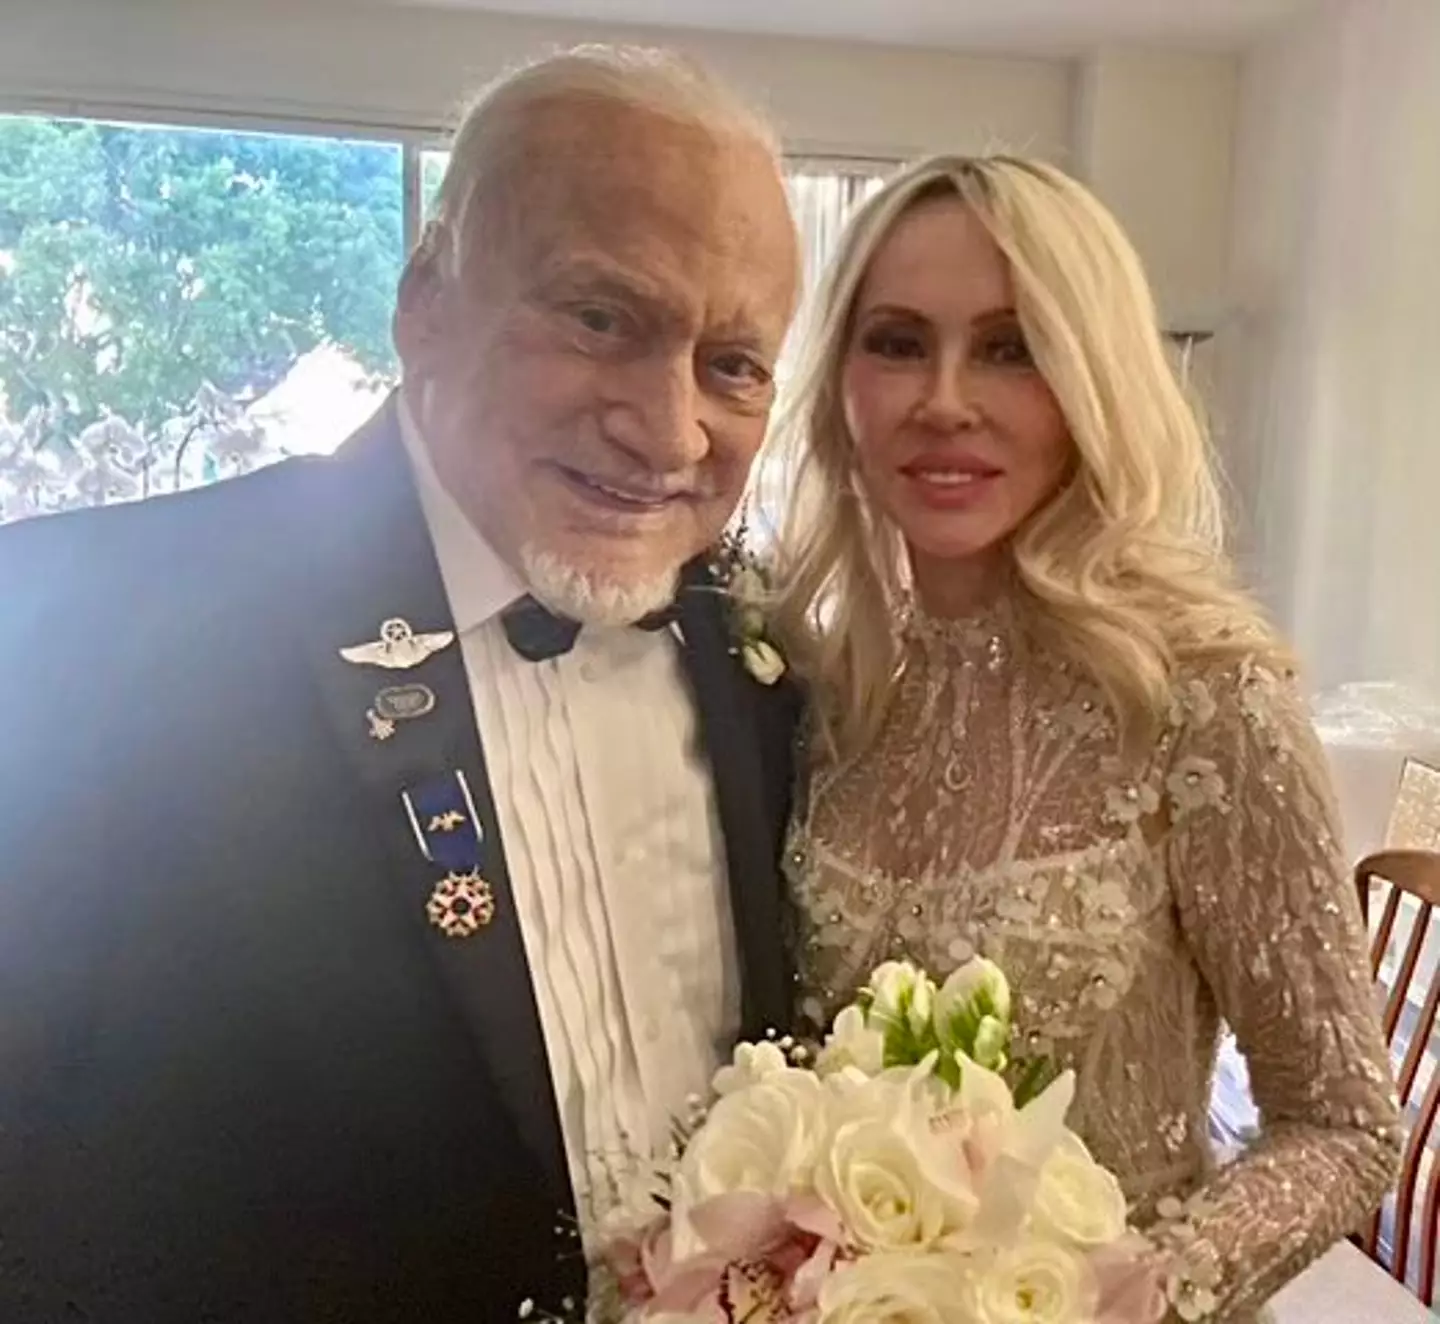 Buzz Aldrin married Dr. Anca Faur on his 93rd birthday.